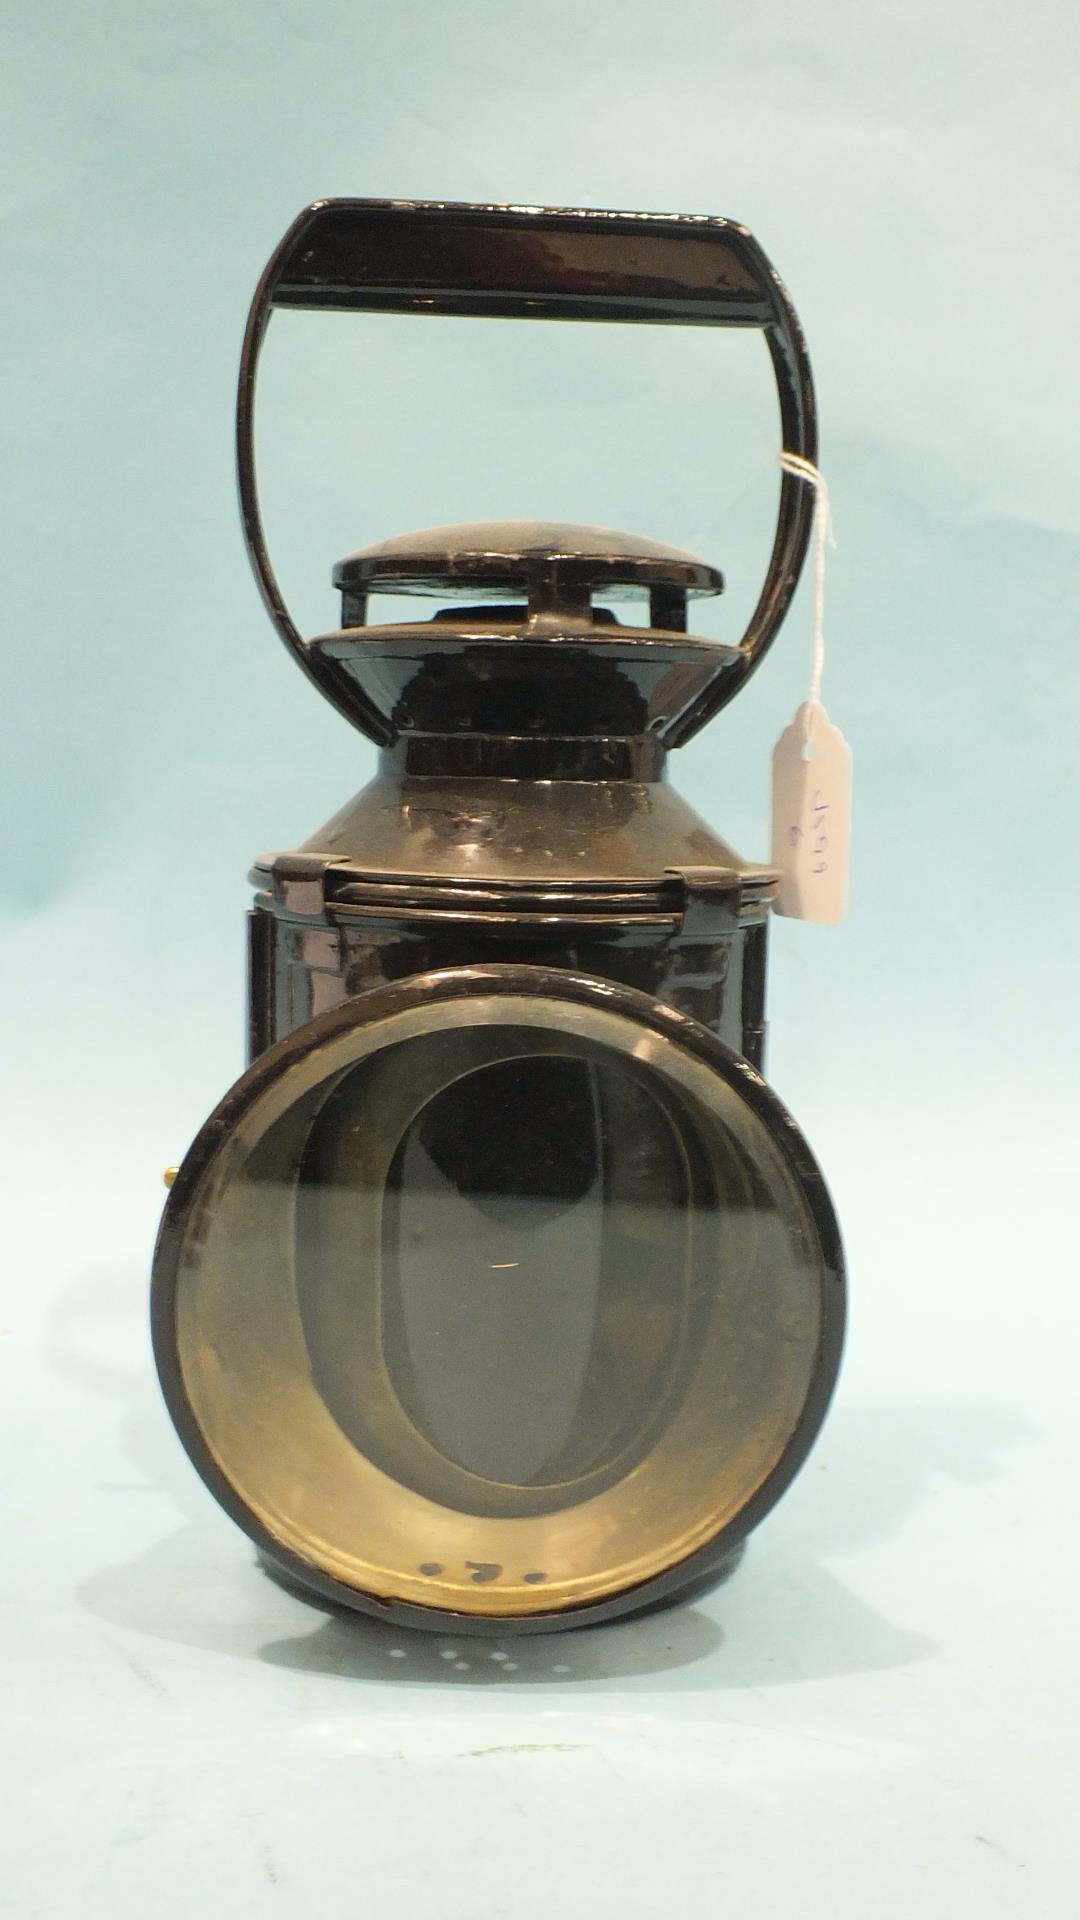 A Japanned four-aspect hand lamp with burner, reservoir, reflector and all four glasses.